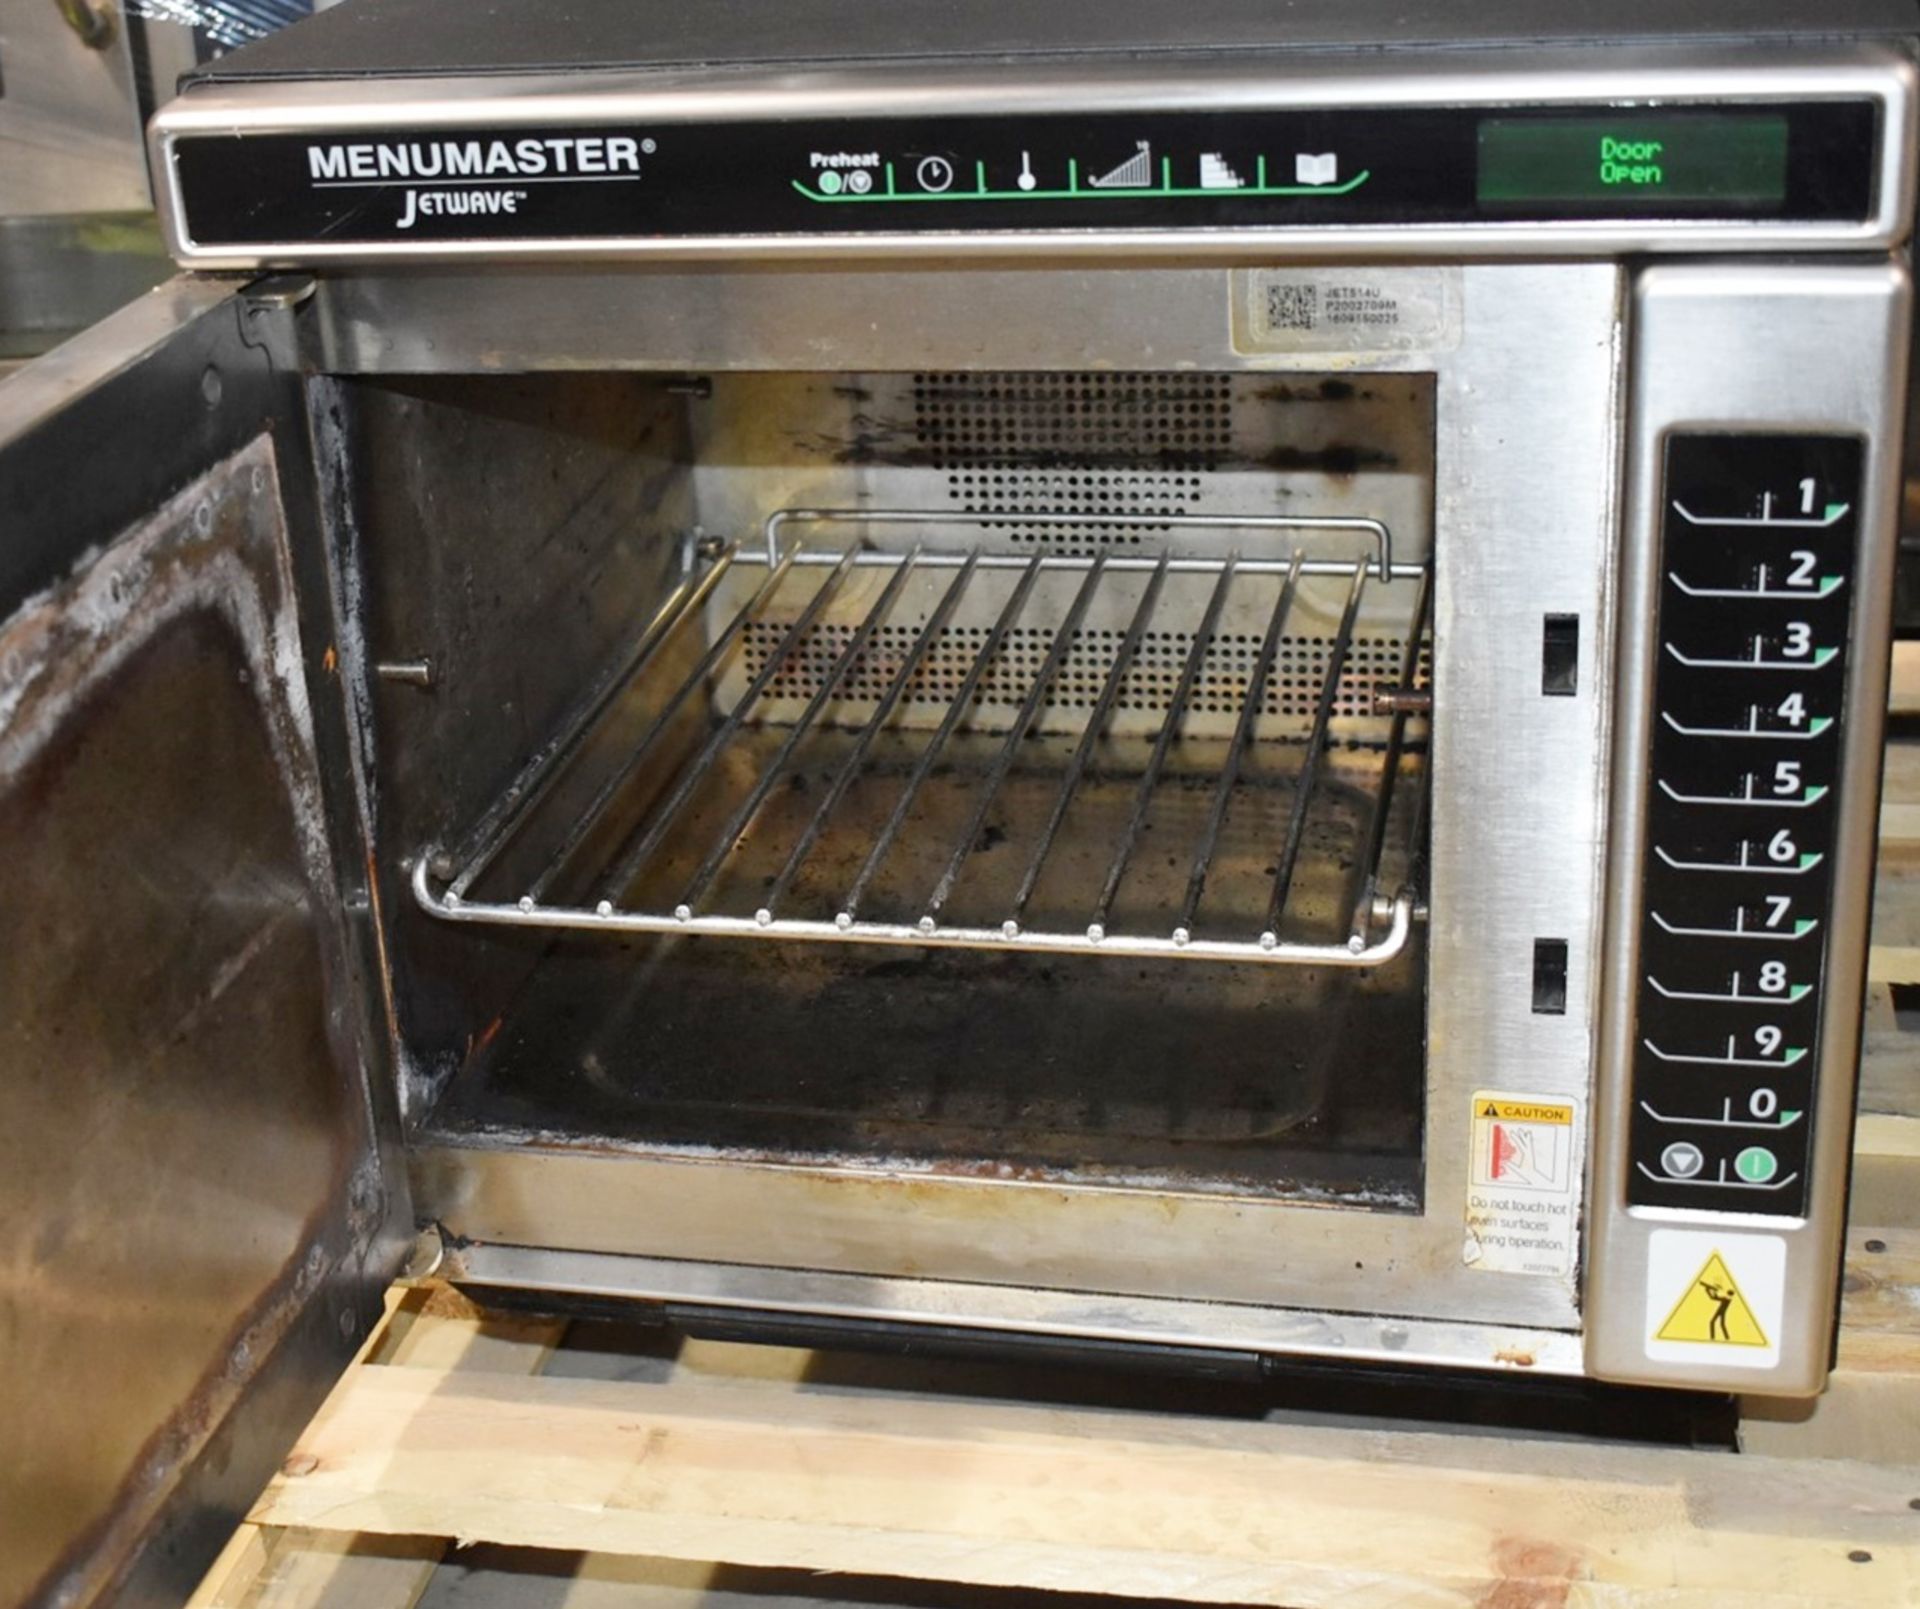 1 x Menumaster Jetwave JET514U High Speed Combination Microwave Oven - RRP £2,400 - Recently Removed - Image 8 of 8